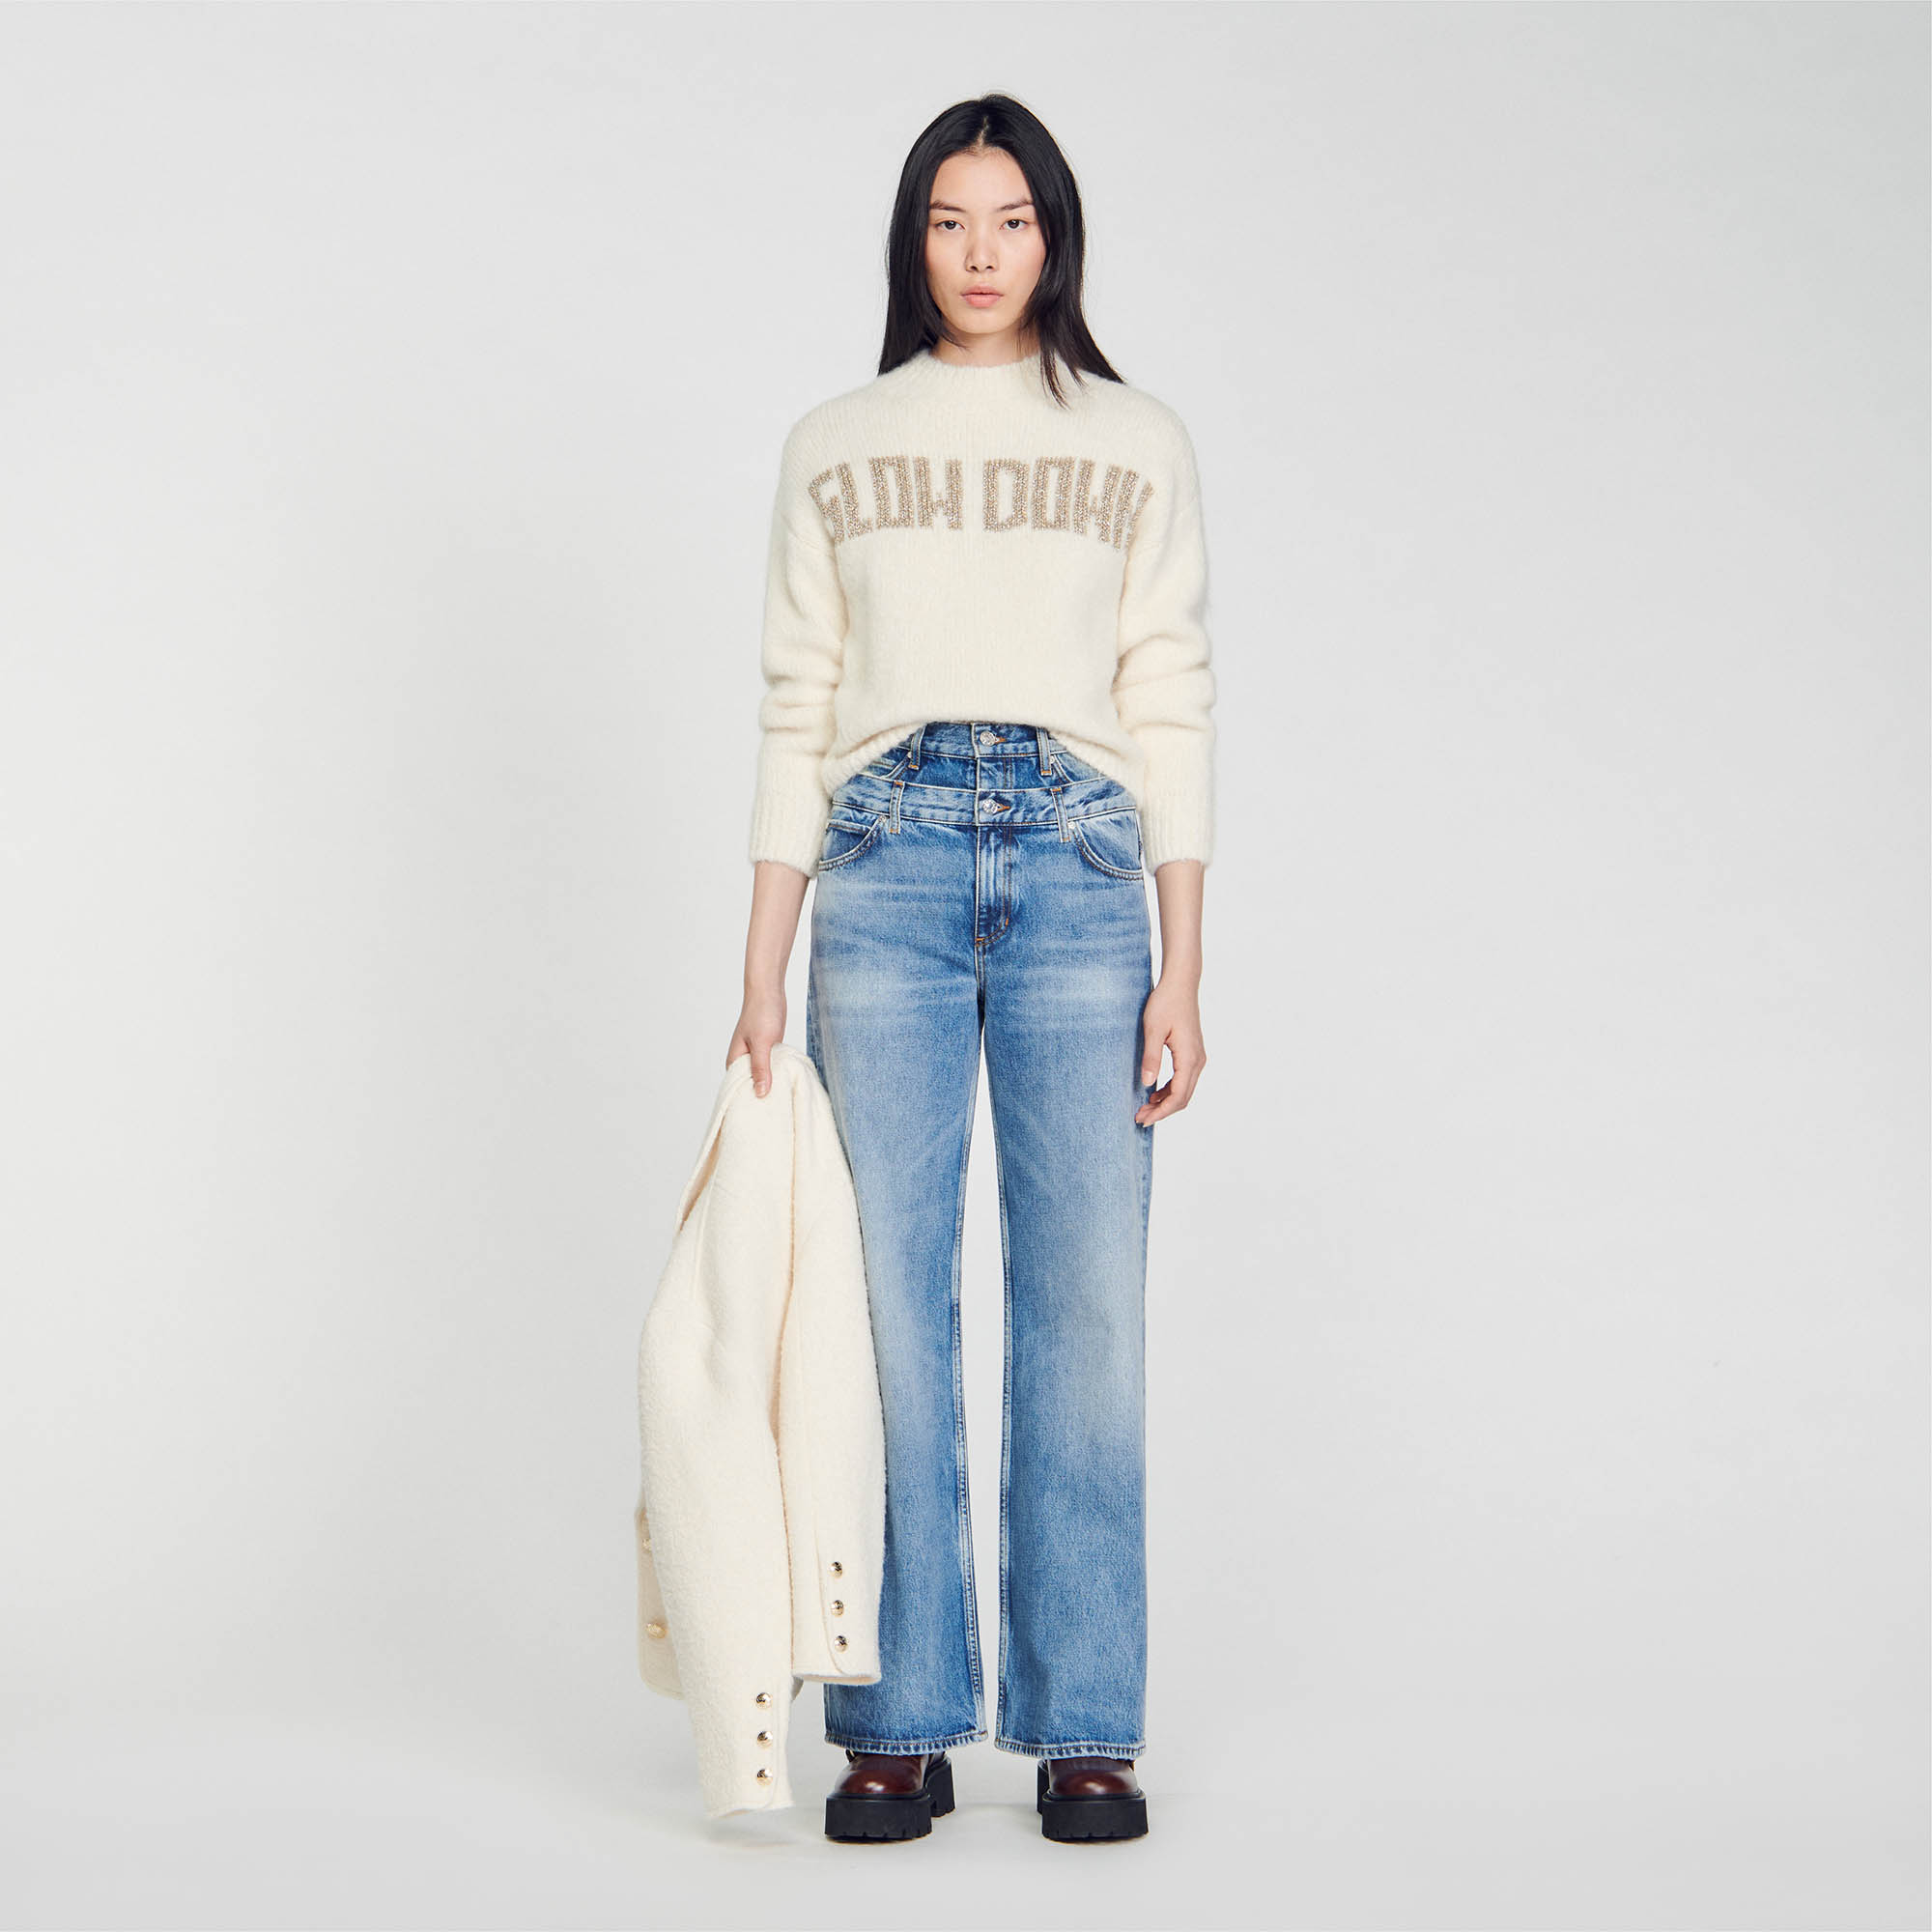 Sandro alpaca Fluffy knit sweater with high neck and long sleeves, embellished with a jacquard Slow Down on the chest